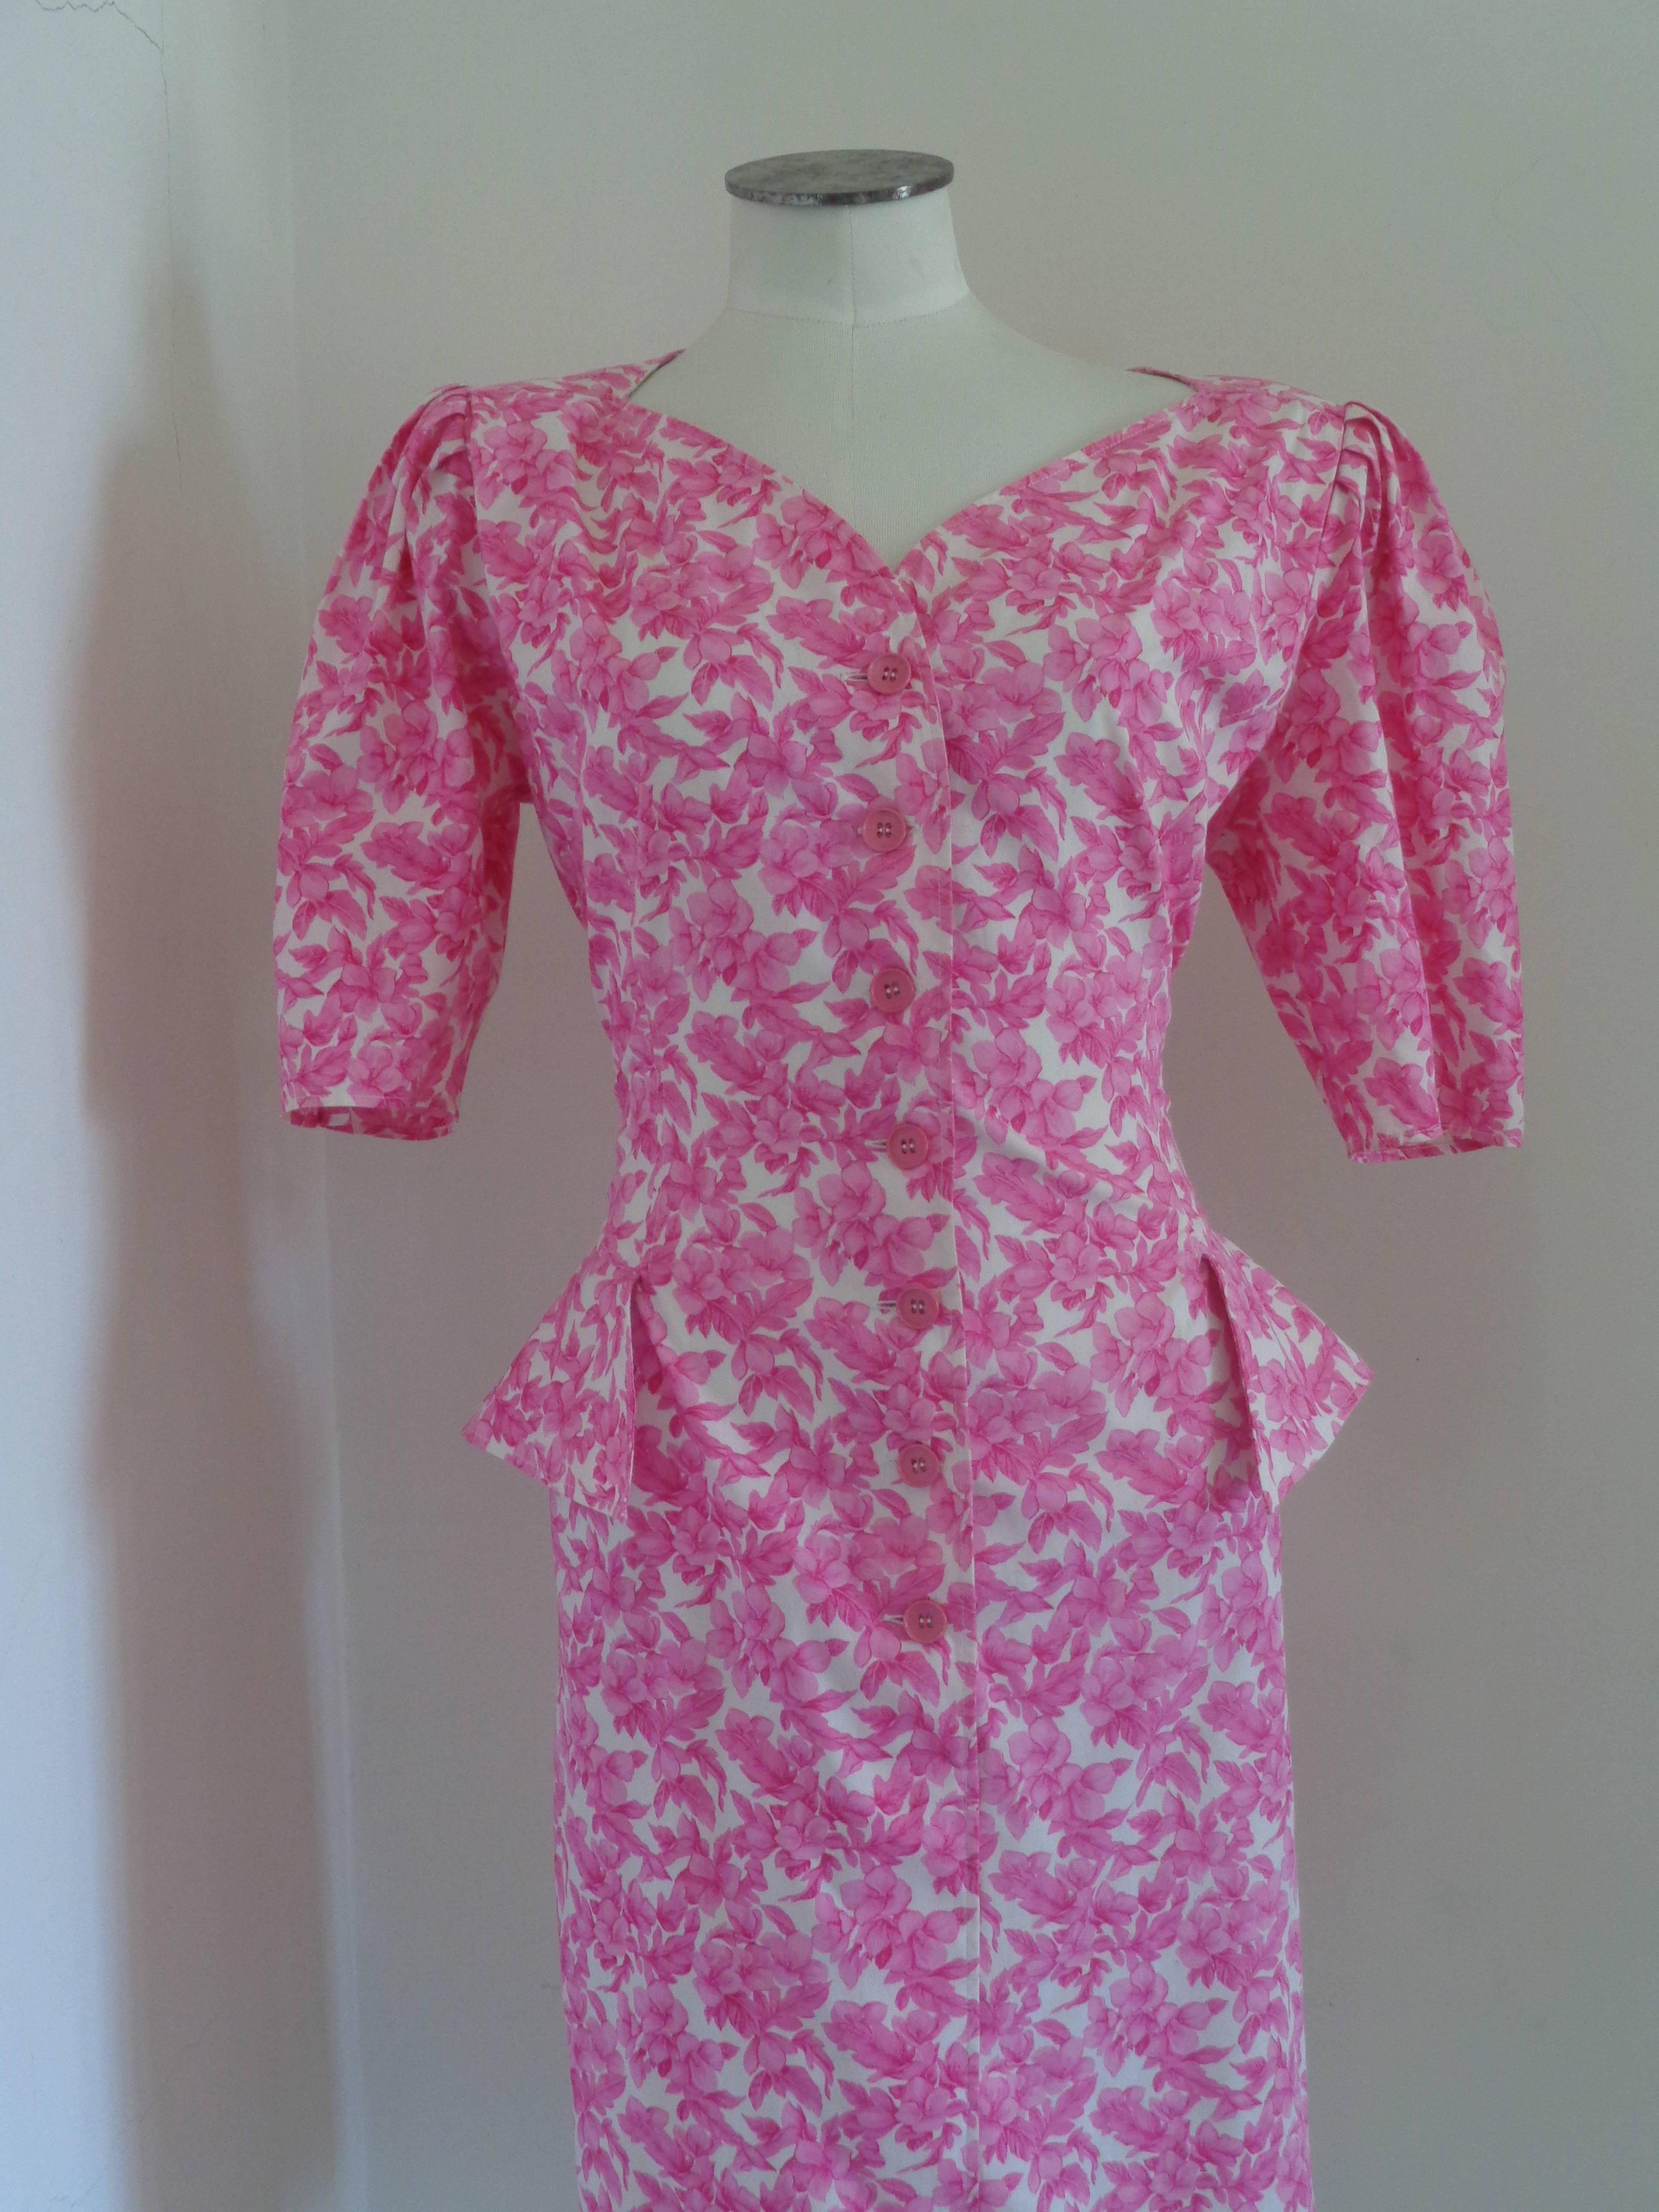 Ungaro Solo Donna Paris White pink flower dress

Totally made in italy in italian size range 46

Composition: Other